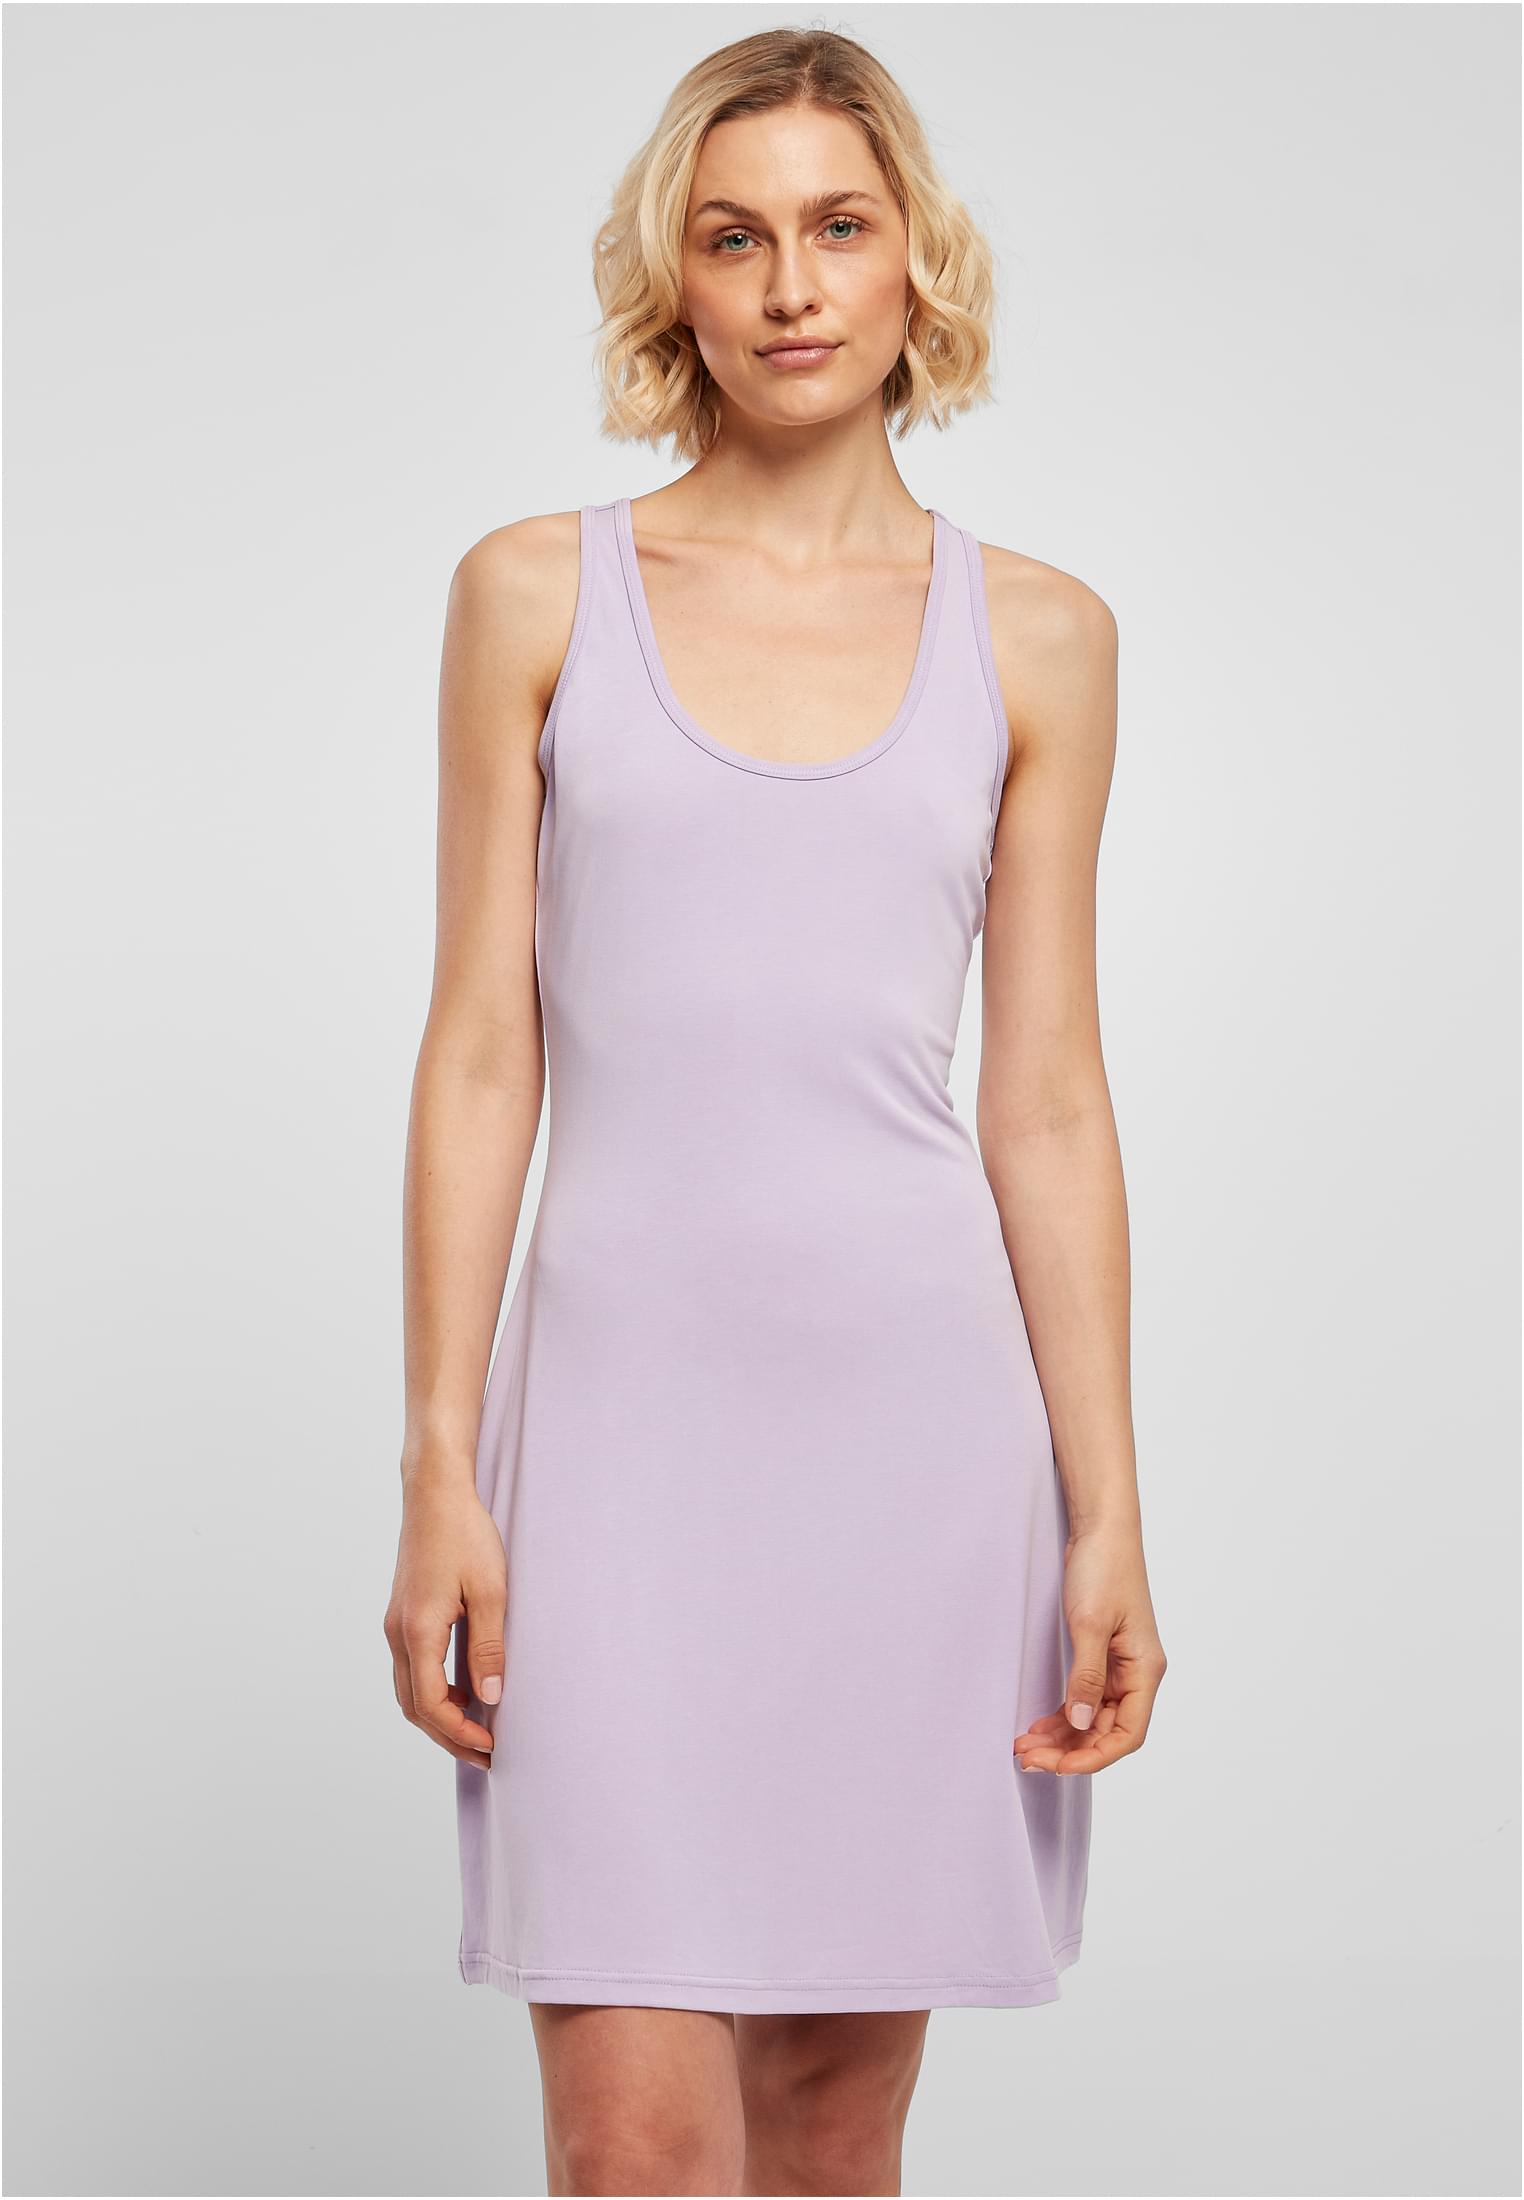 Women's Modal Short Racer Dress with Lilac Back